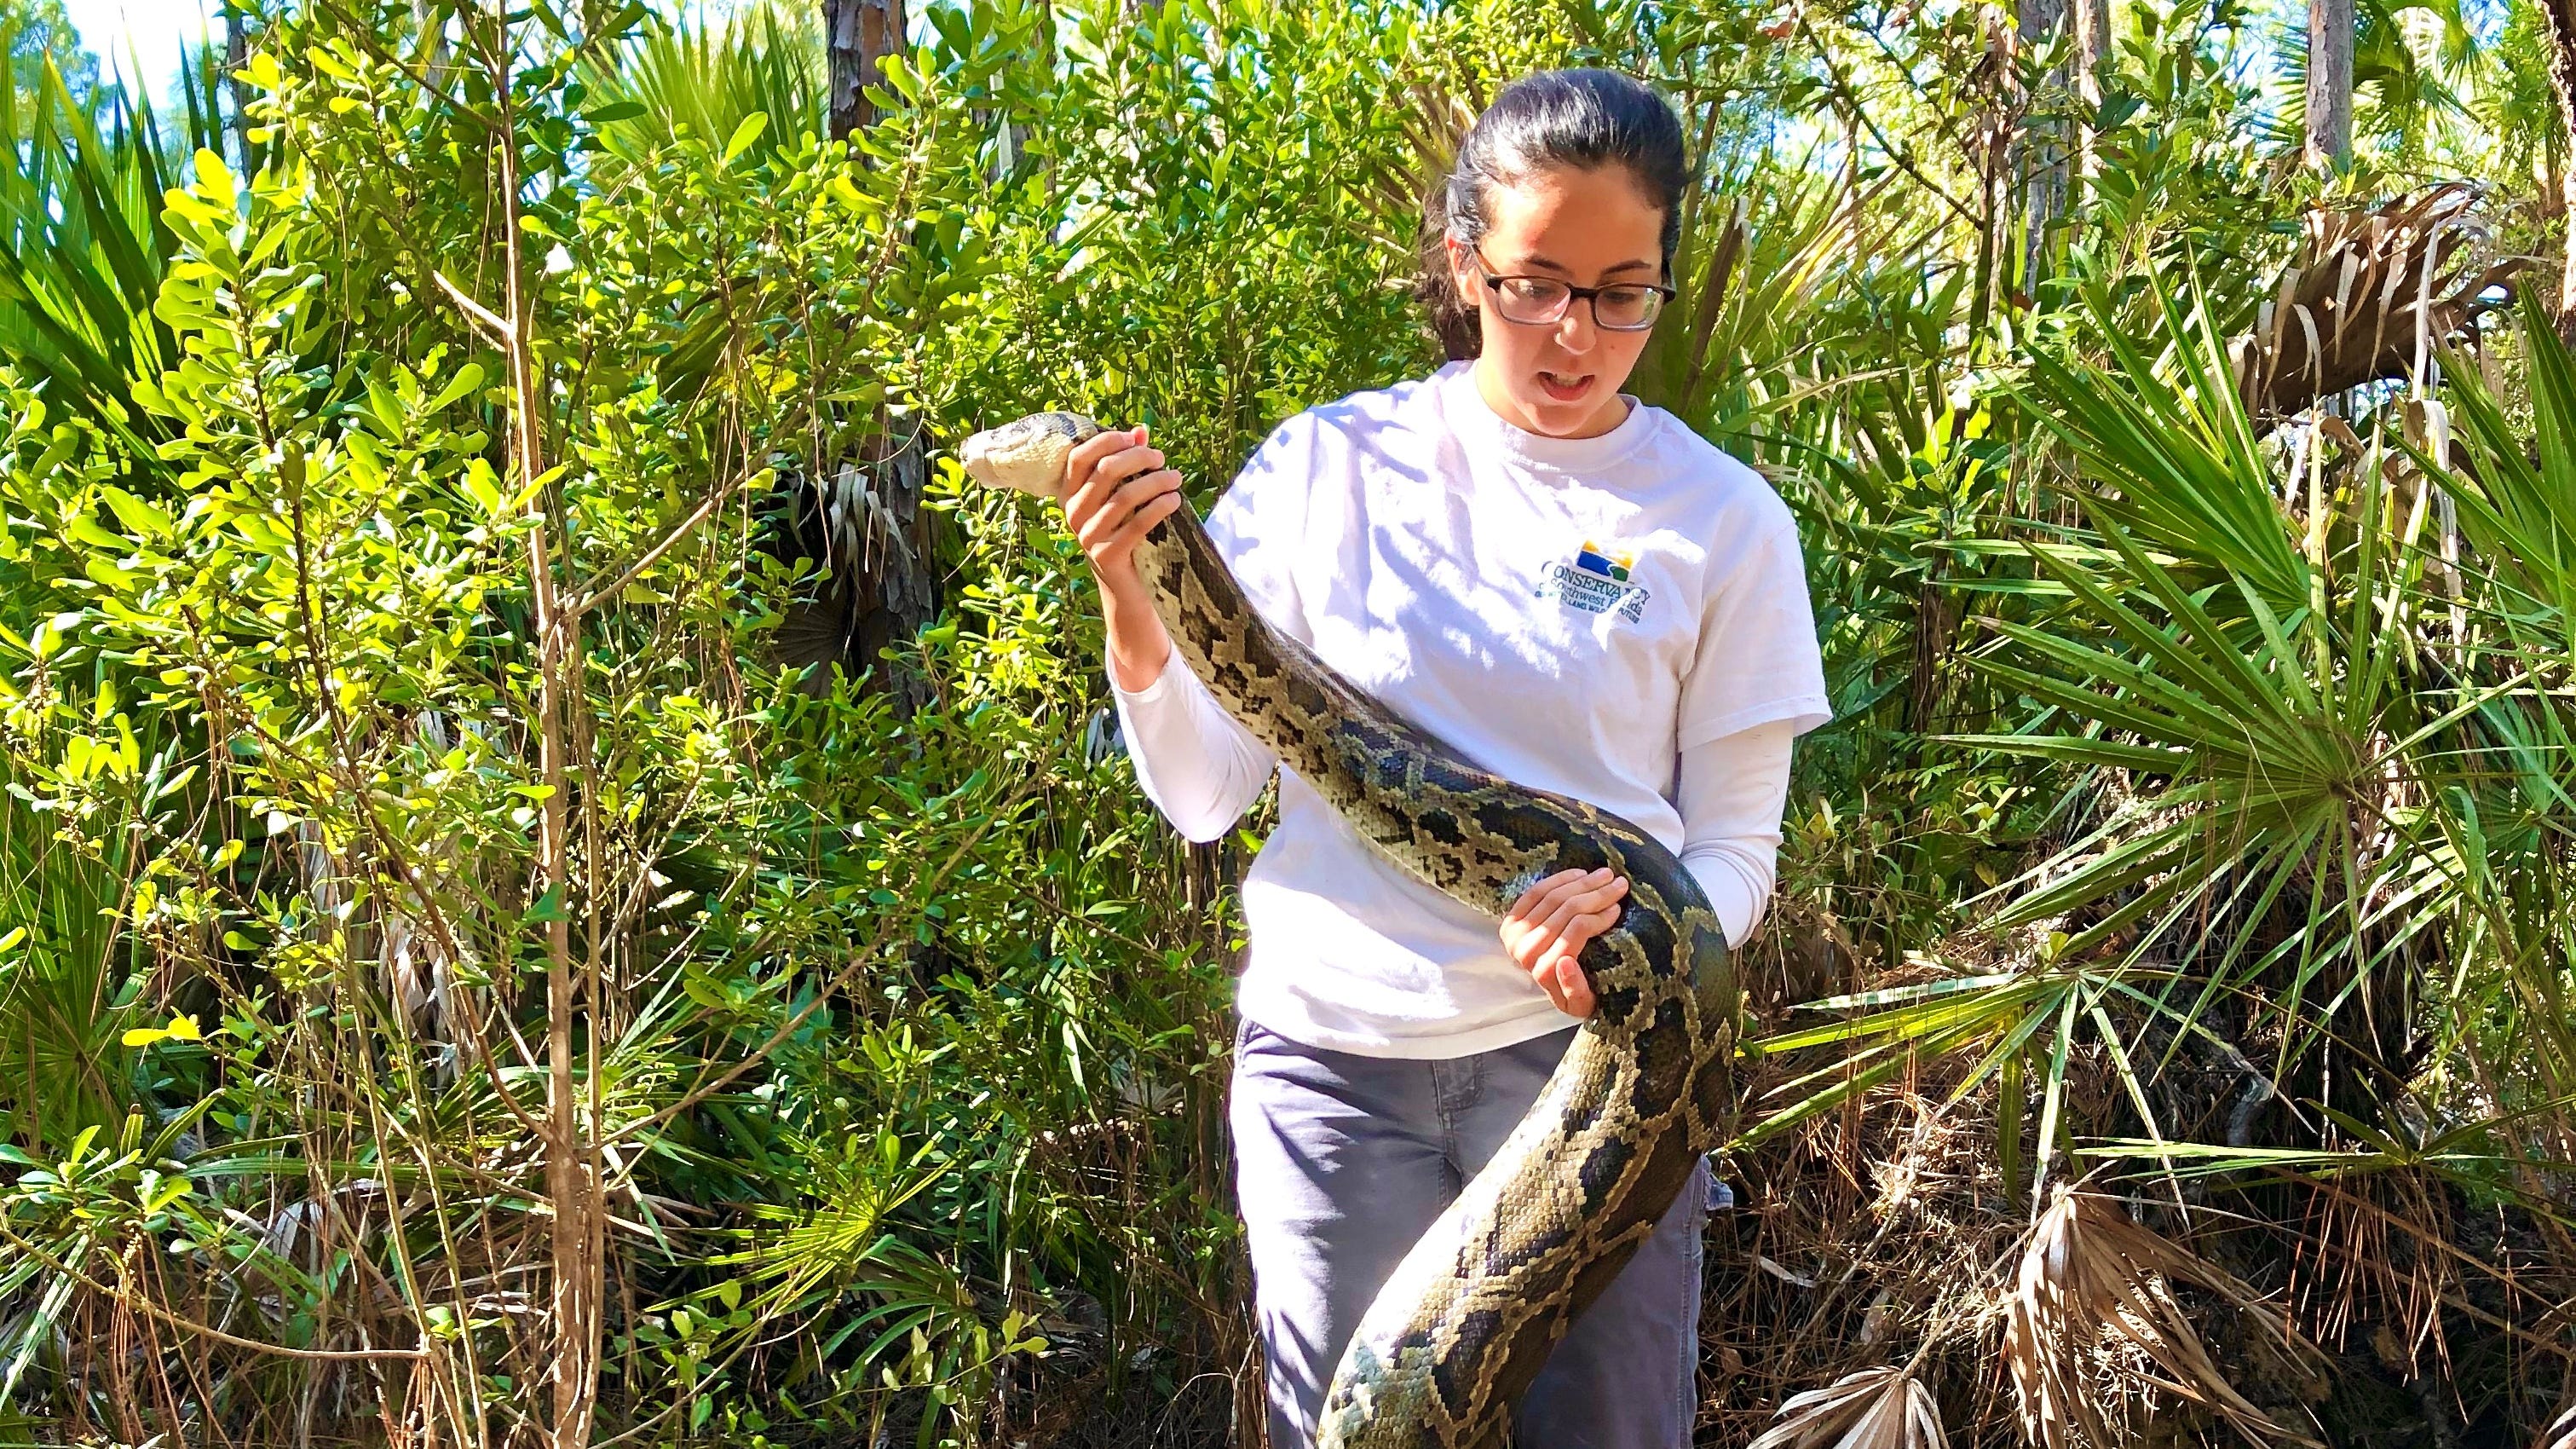 Conservation Associate Mady Eori with the Conservancy of Southwest Florida holds a 15-foot, 125-pound female Burmese python in the Picayune Strand State Forest.